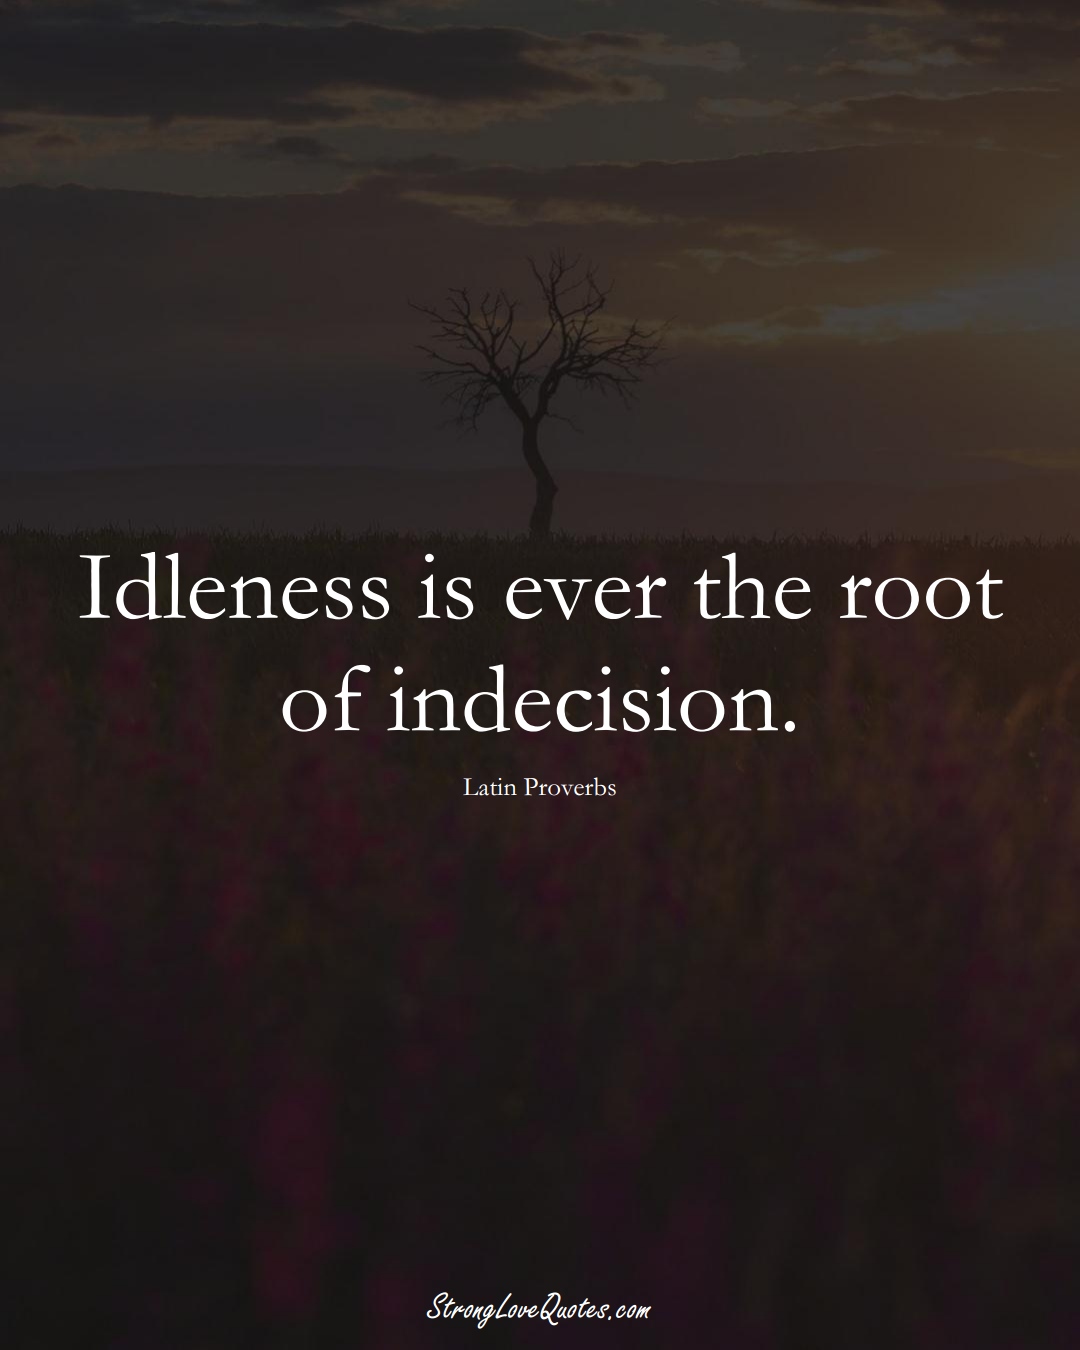 Idleness is ever the root of indecision. (Latin Sayings);  #aVarietyofCulturesSayings